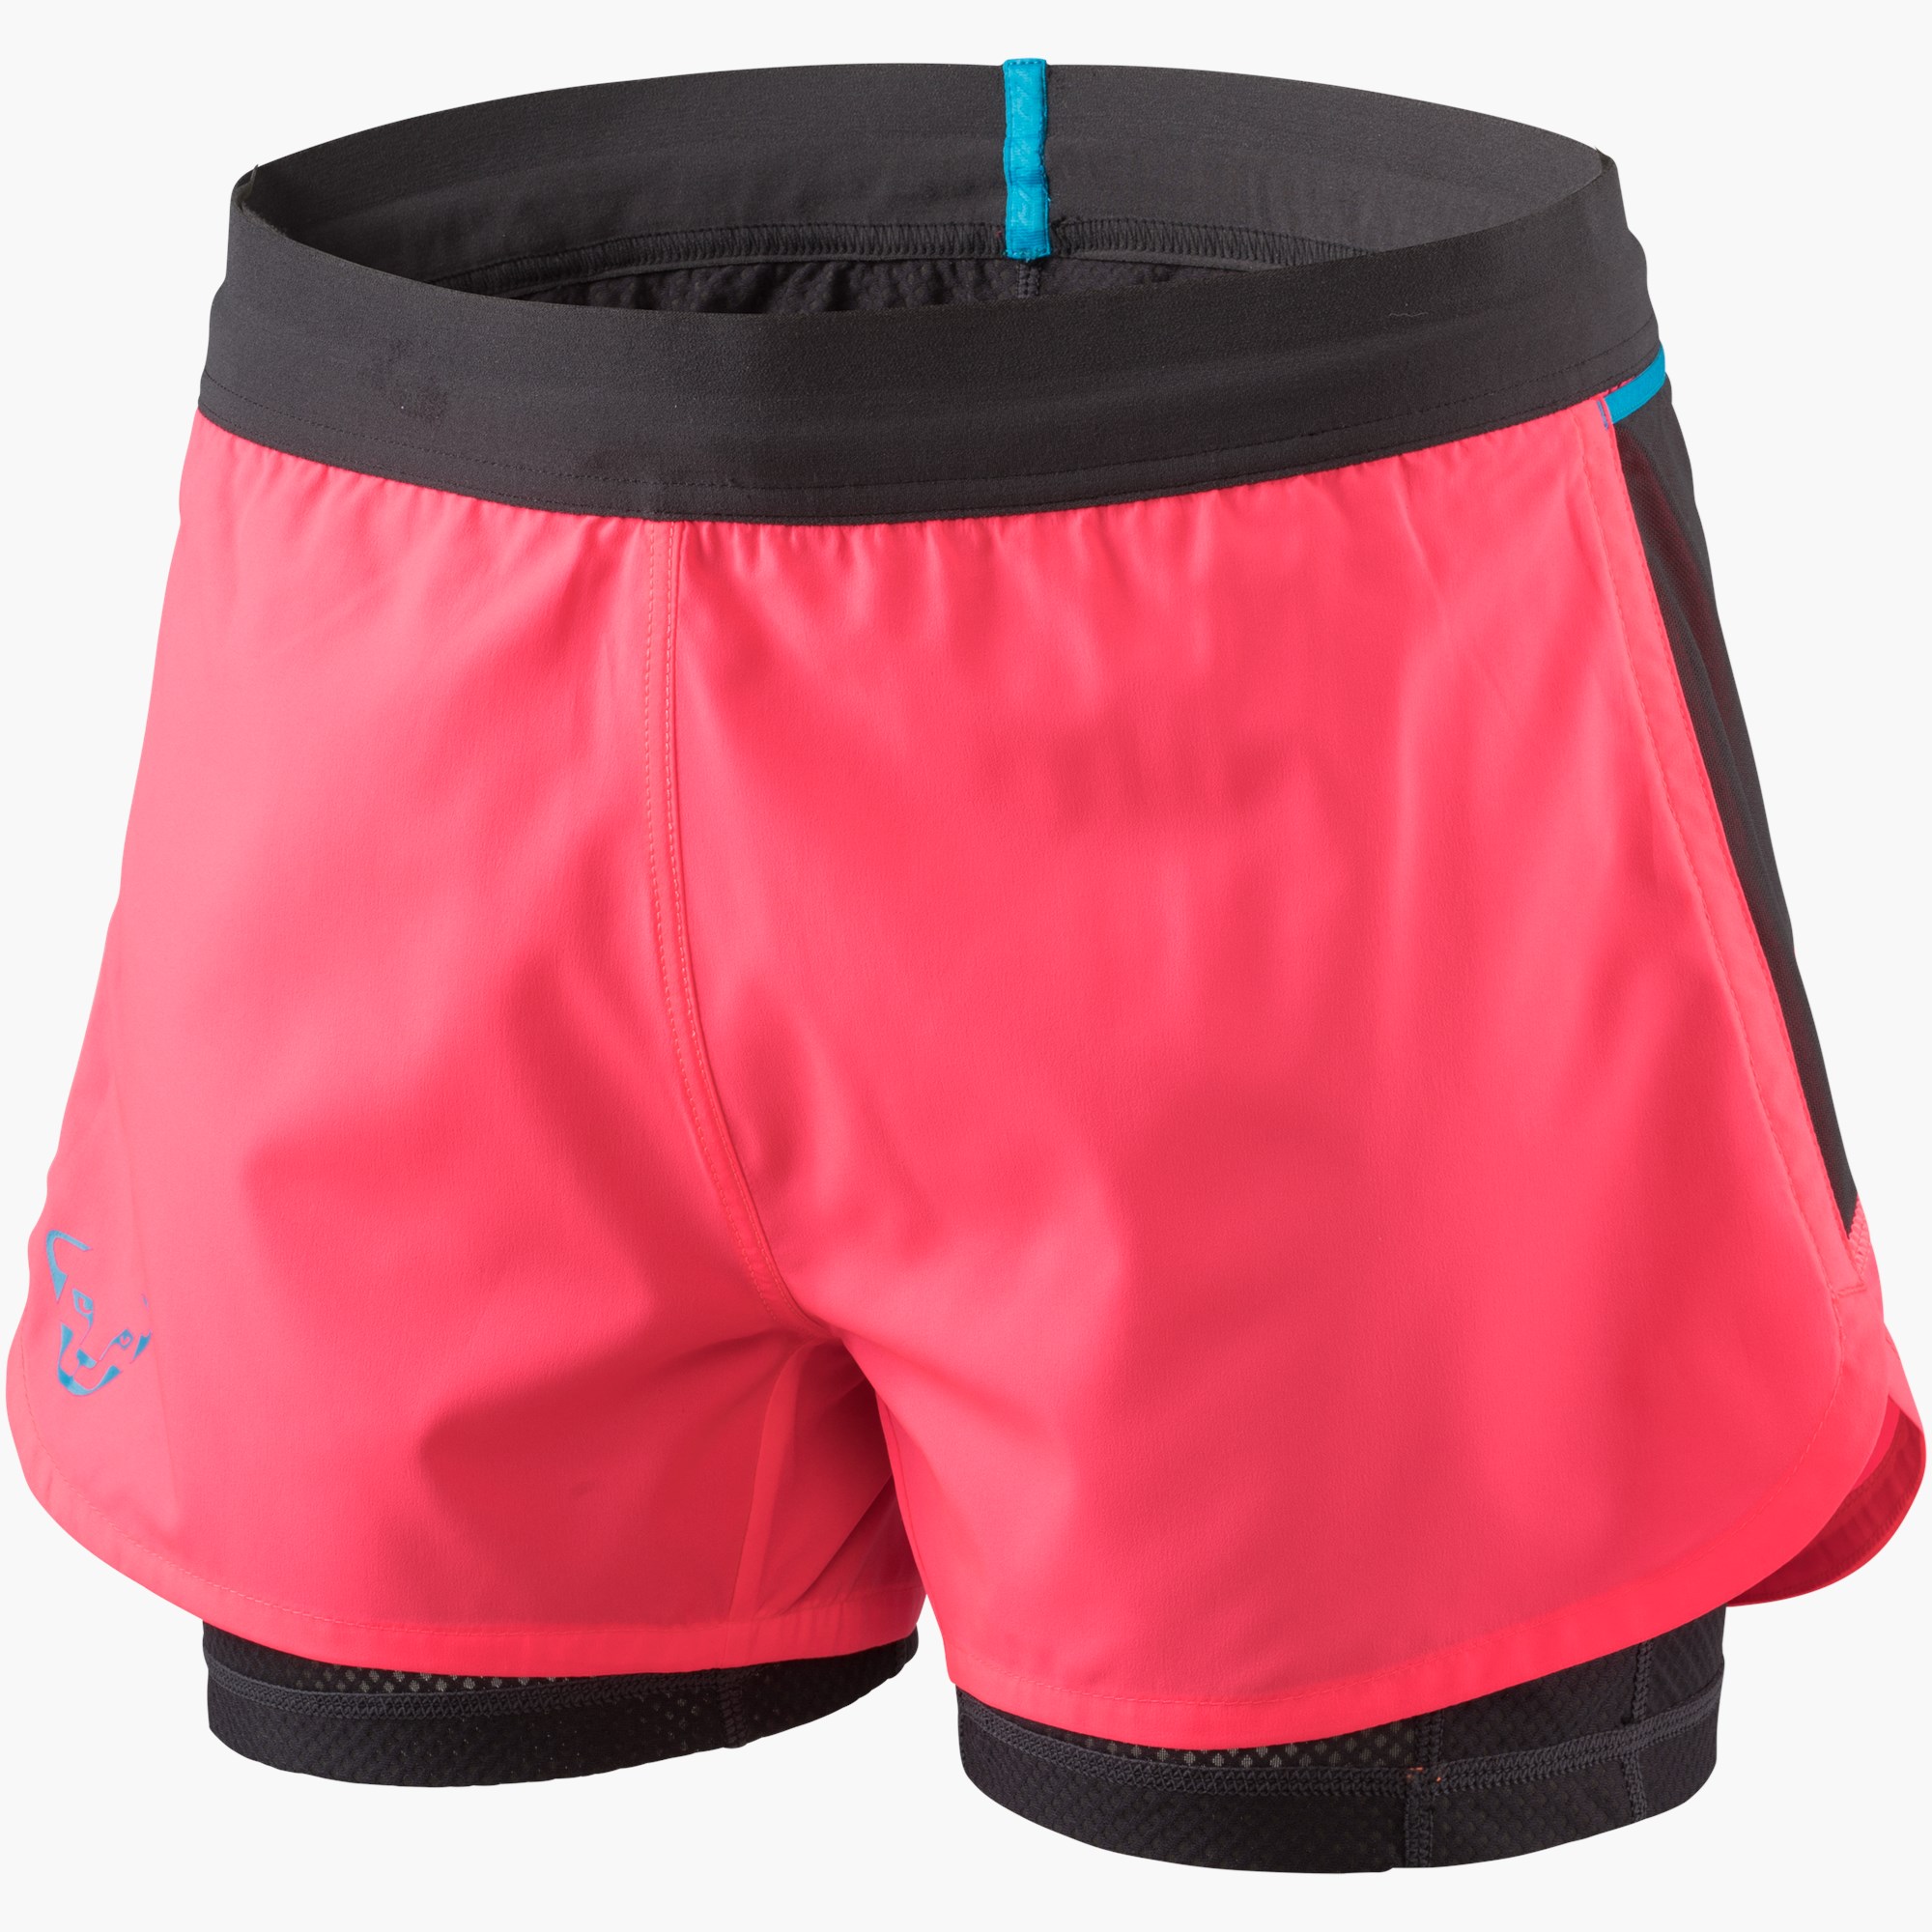 Fluo pink/0980_6431